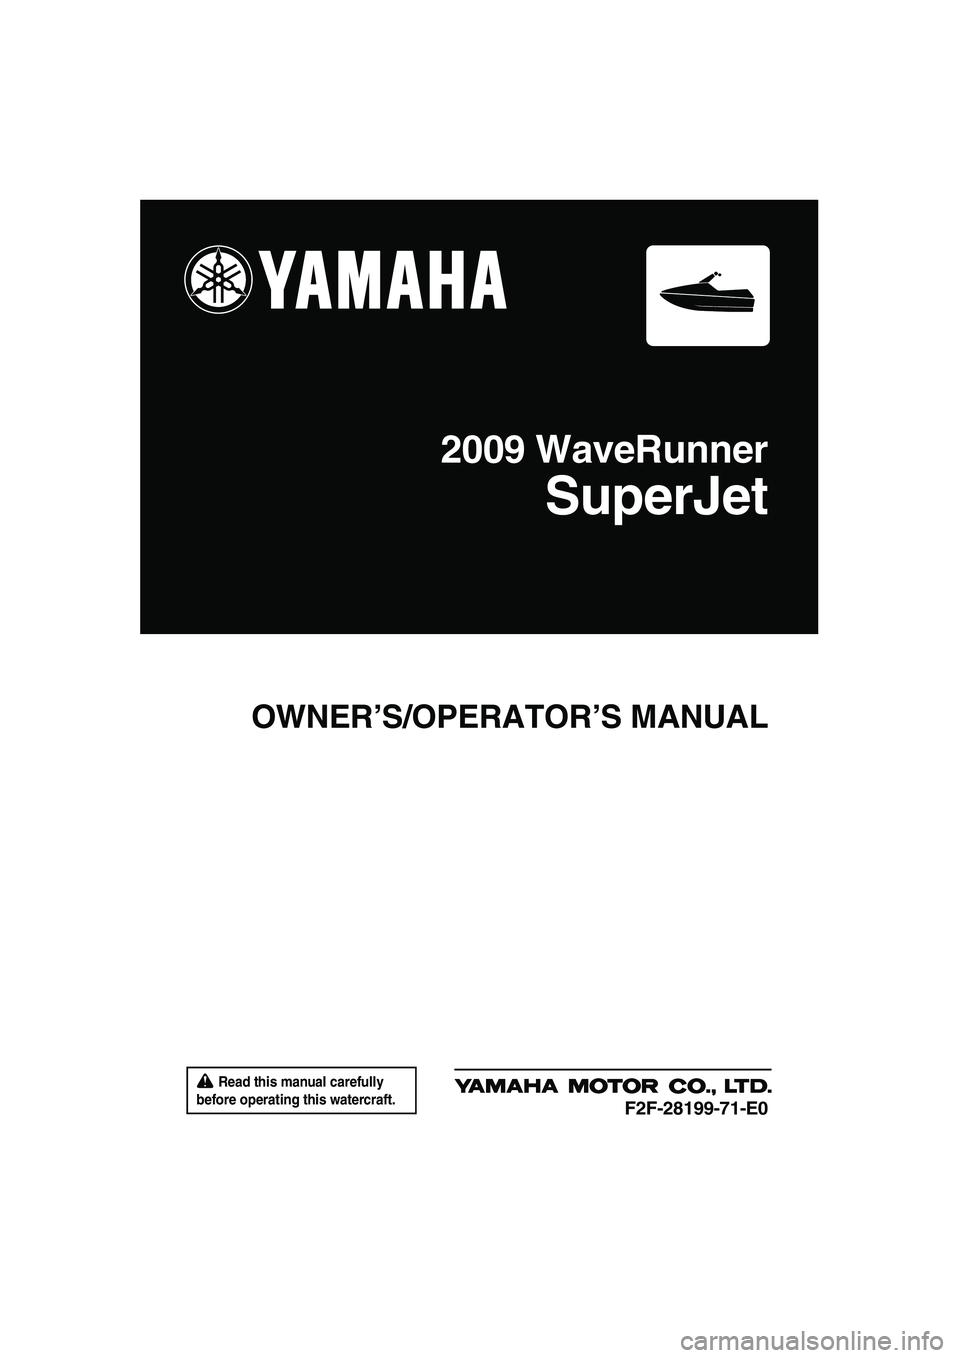 YAMAHA SUPERJET 2009  Owners Manual  Read this manual carefully 
before operating this watercraft.
OWNER’S/OPERATOR’S MANUAL
2009 WaveRunner
SuperJet
F2F-28199-71-E0
UF2F71E0.book  Page 1  Thursday, April 10, 2008  11:47 AM 